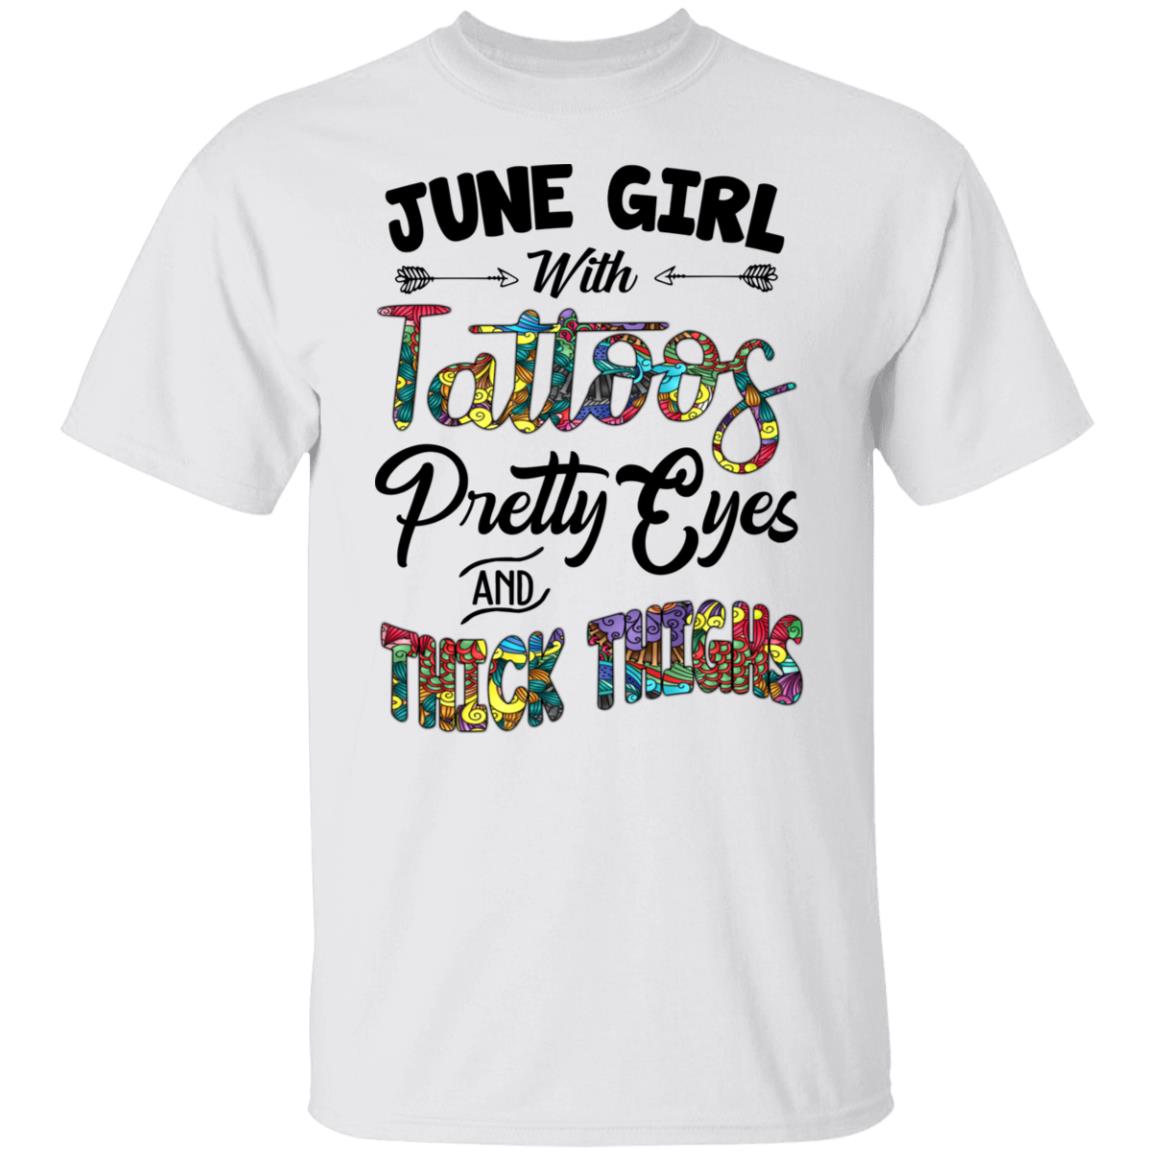 June Girl With Tattoos Pretty Eyes And Thick Thighs Shirt